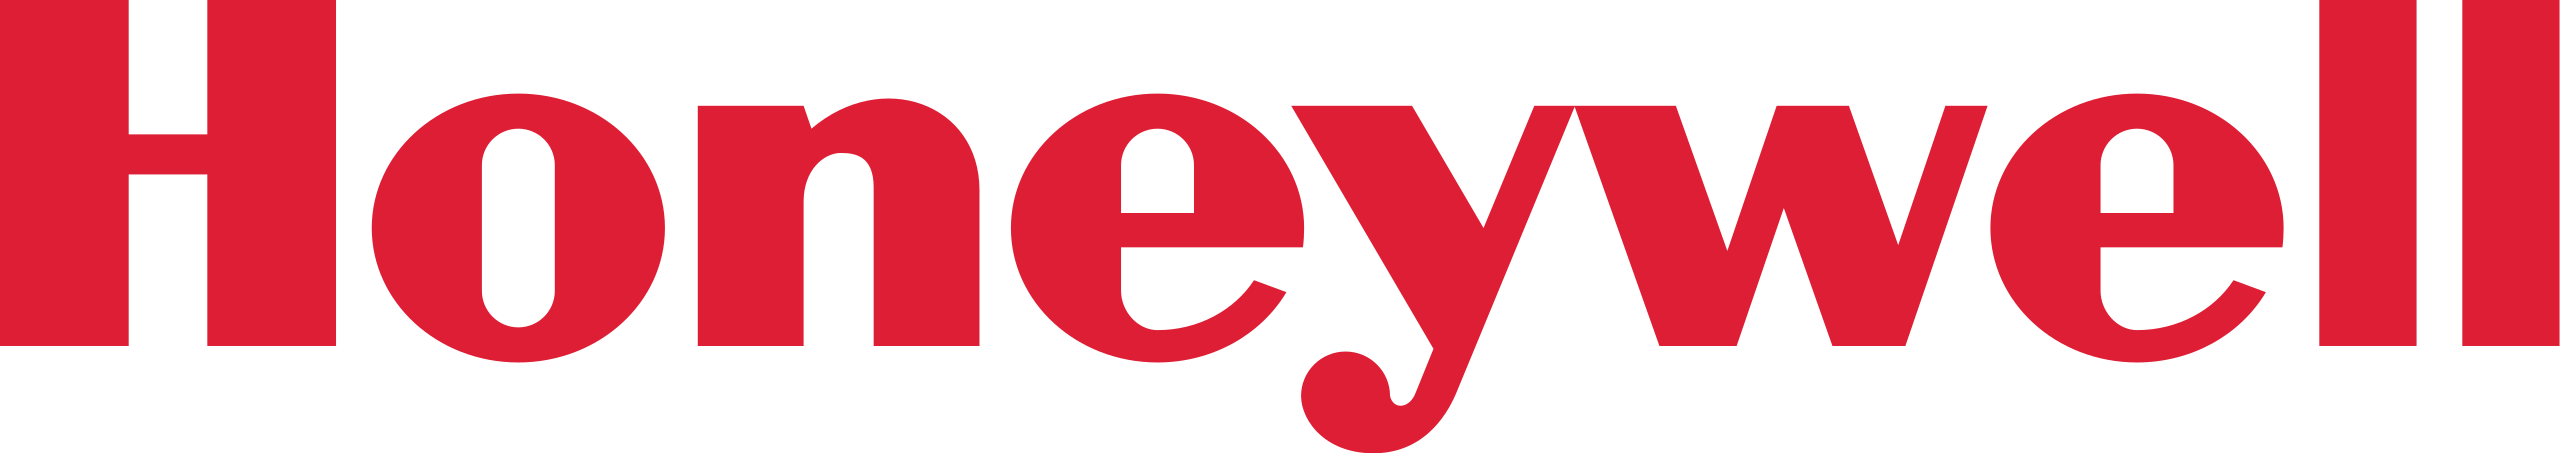 Red honeywell logo with stylized text on a white background.